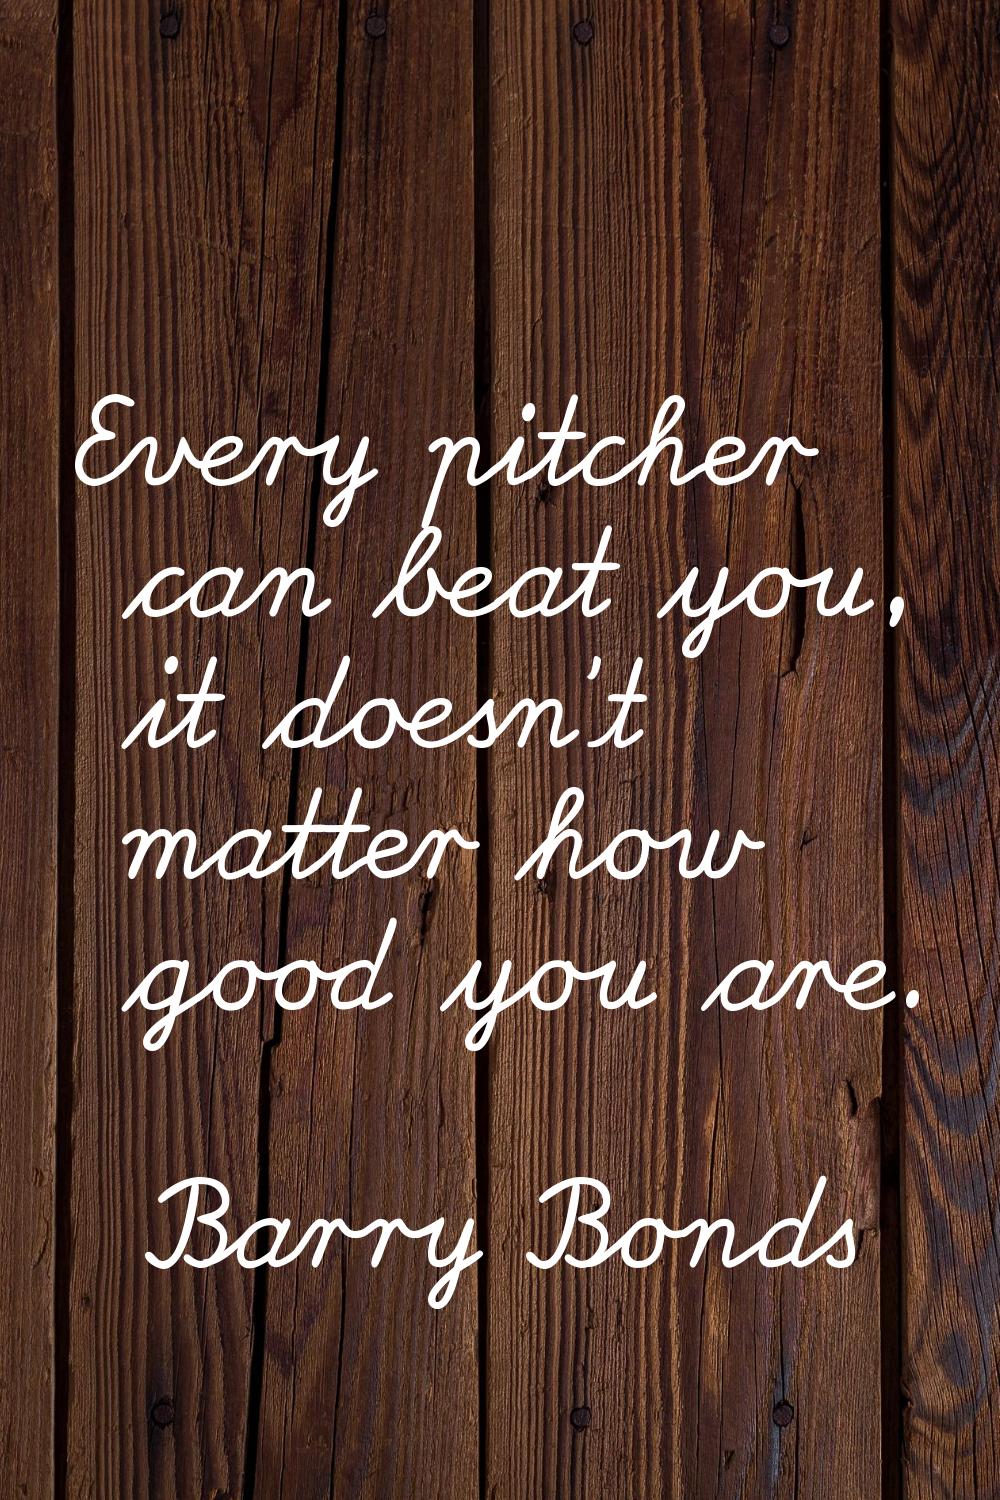 Every pitcher can beat you, it doesn't matter how good you are.